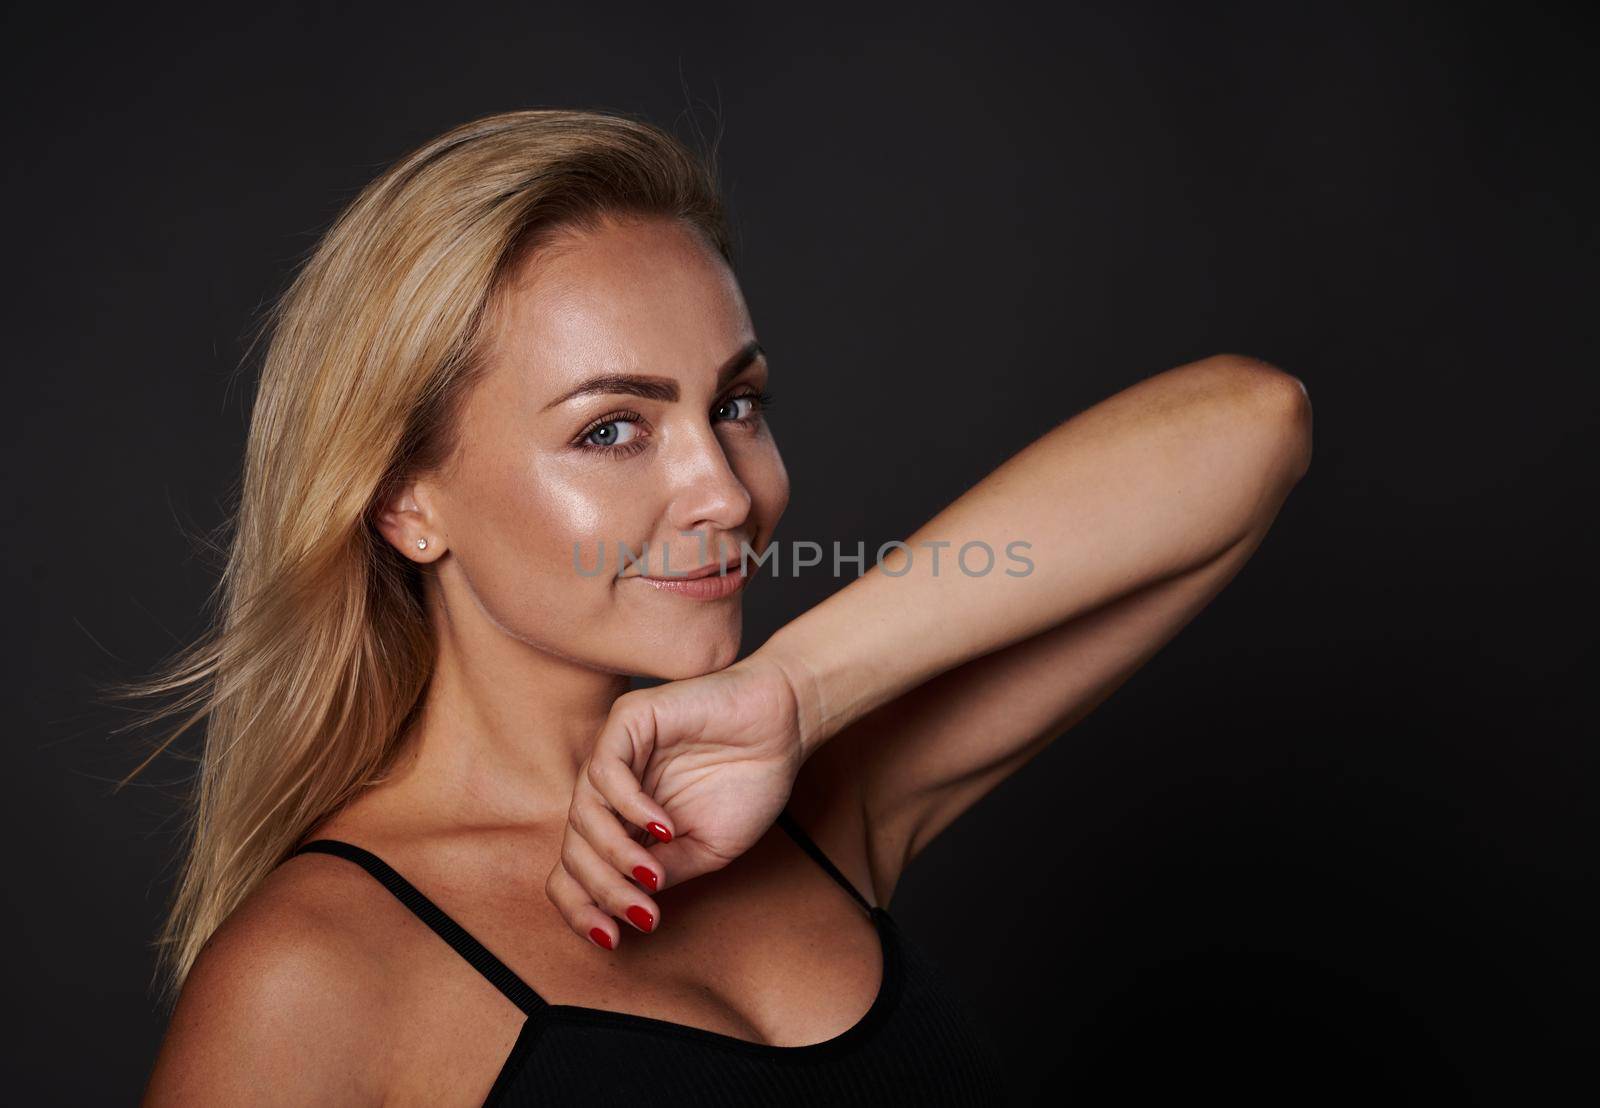 Headshot attractive beautiful woman with shining glowing fresh tanned skin, in underwear cutely smiling looking at camera isolated over black background with copy ad space. Body positivity concept by artgf